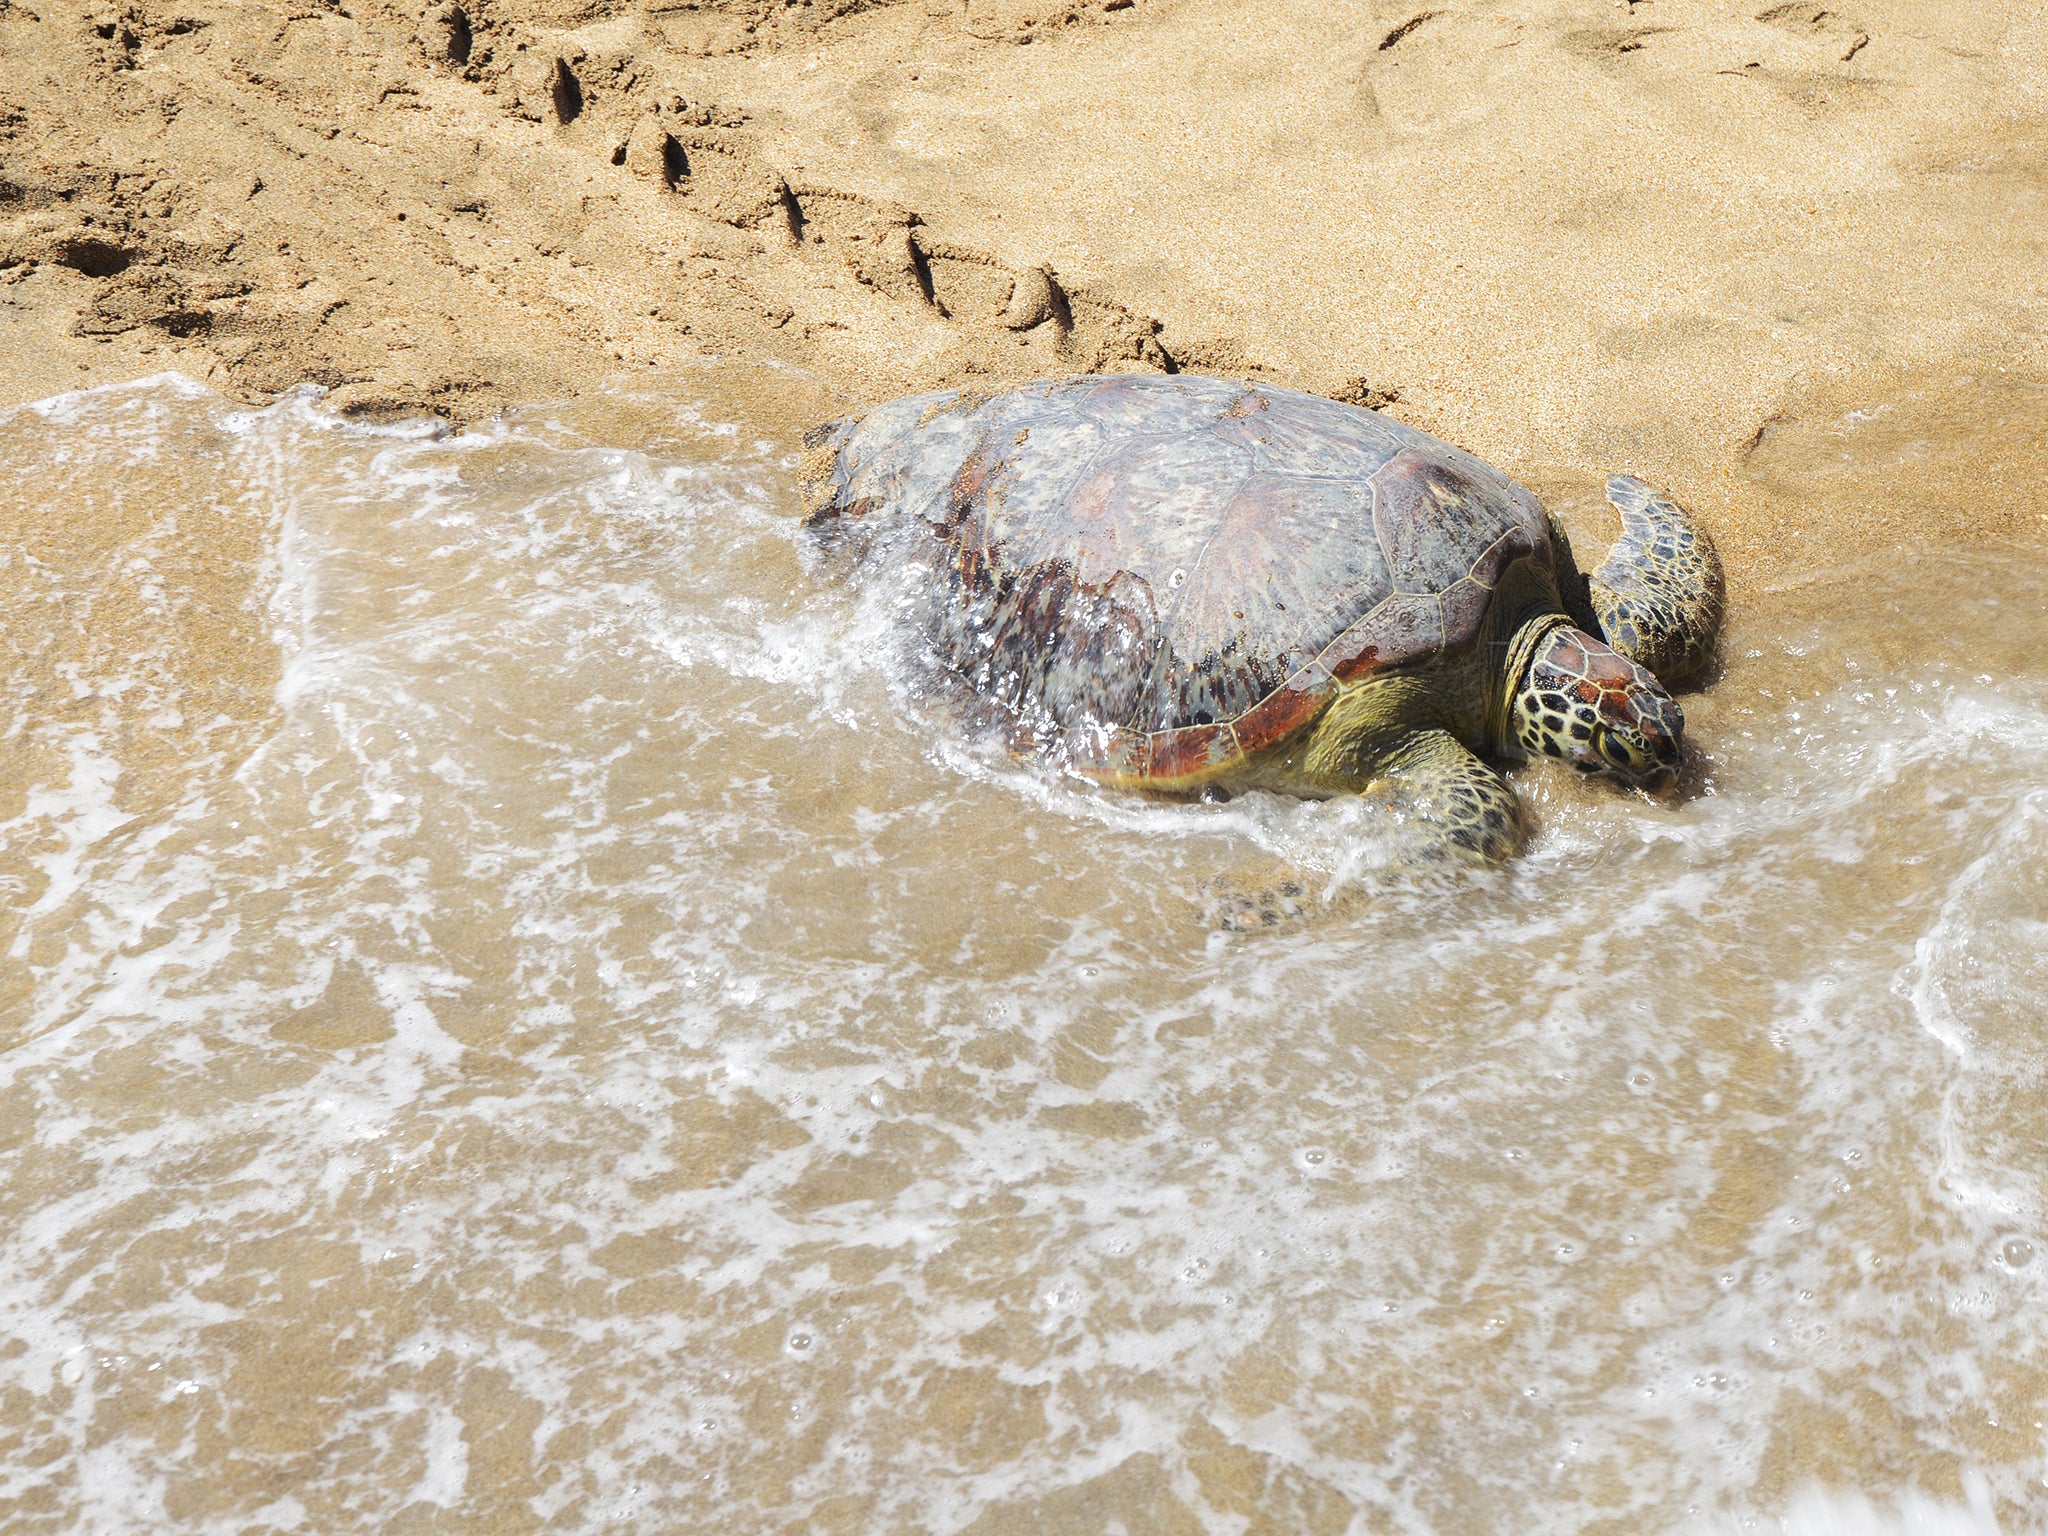 Balinese consider green sea turtles to be a delicacy